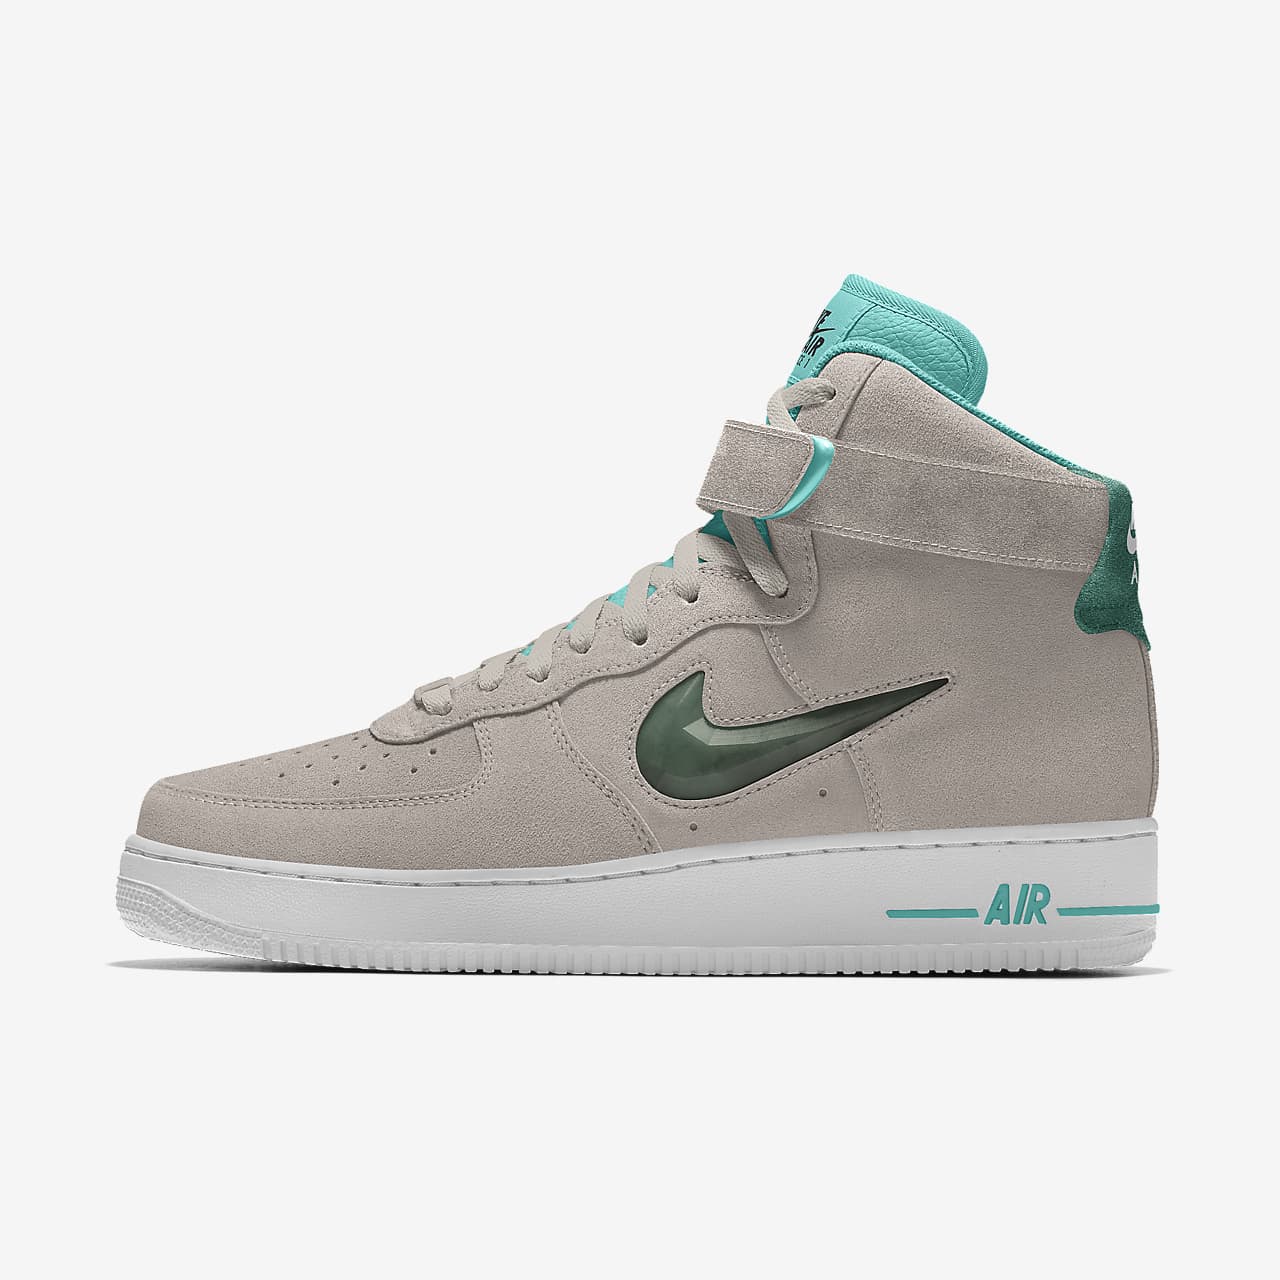 Nike Air 1 High Unlocked By You Zapatillas personalizables - Mujer. Nike